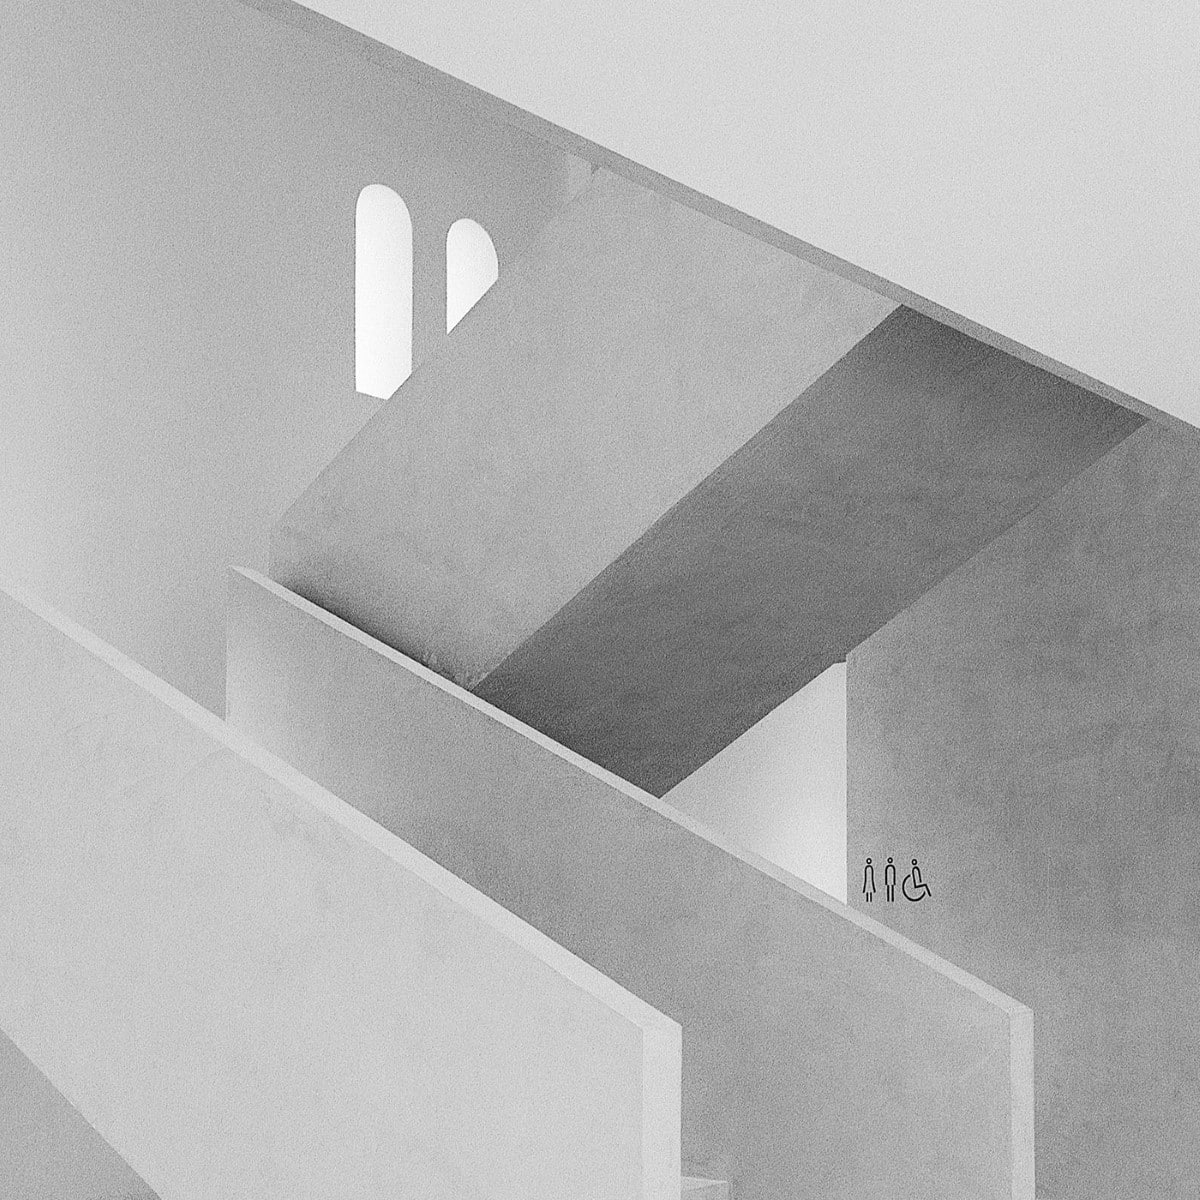 Newly designed and constructed concrete staircase in an old refurbished building 